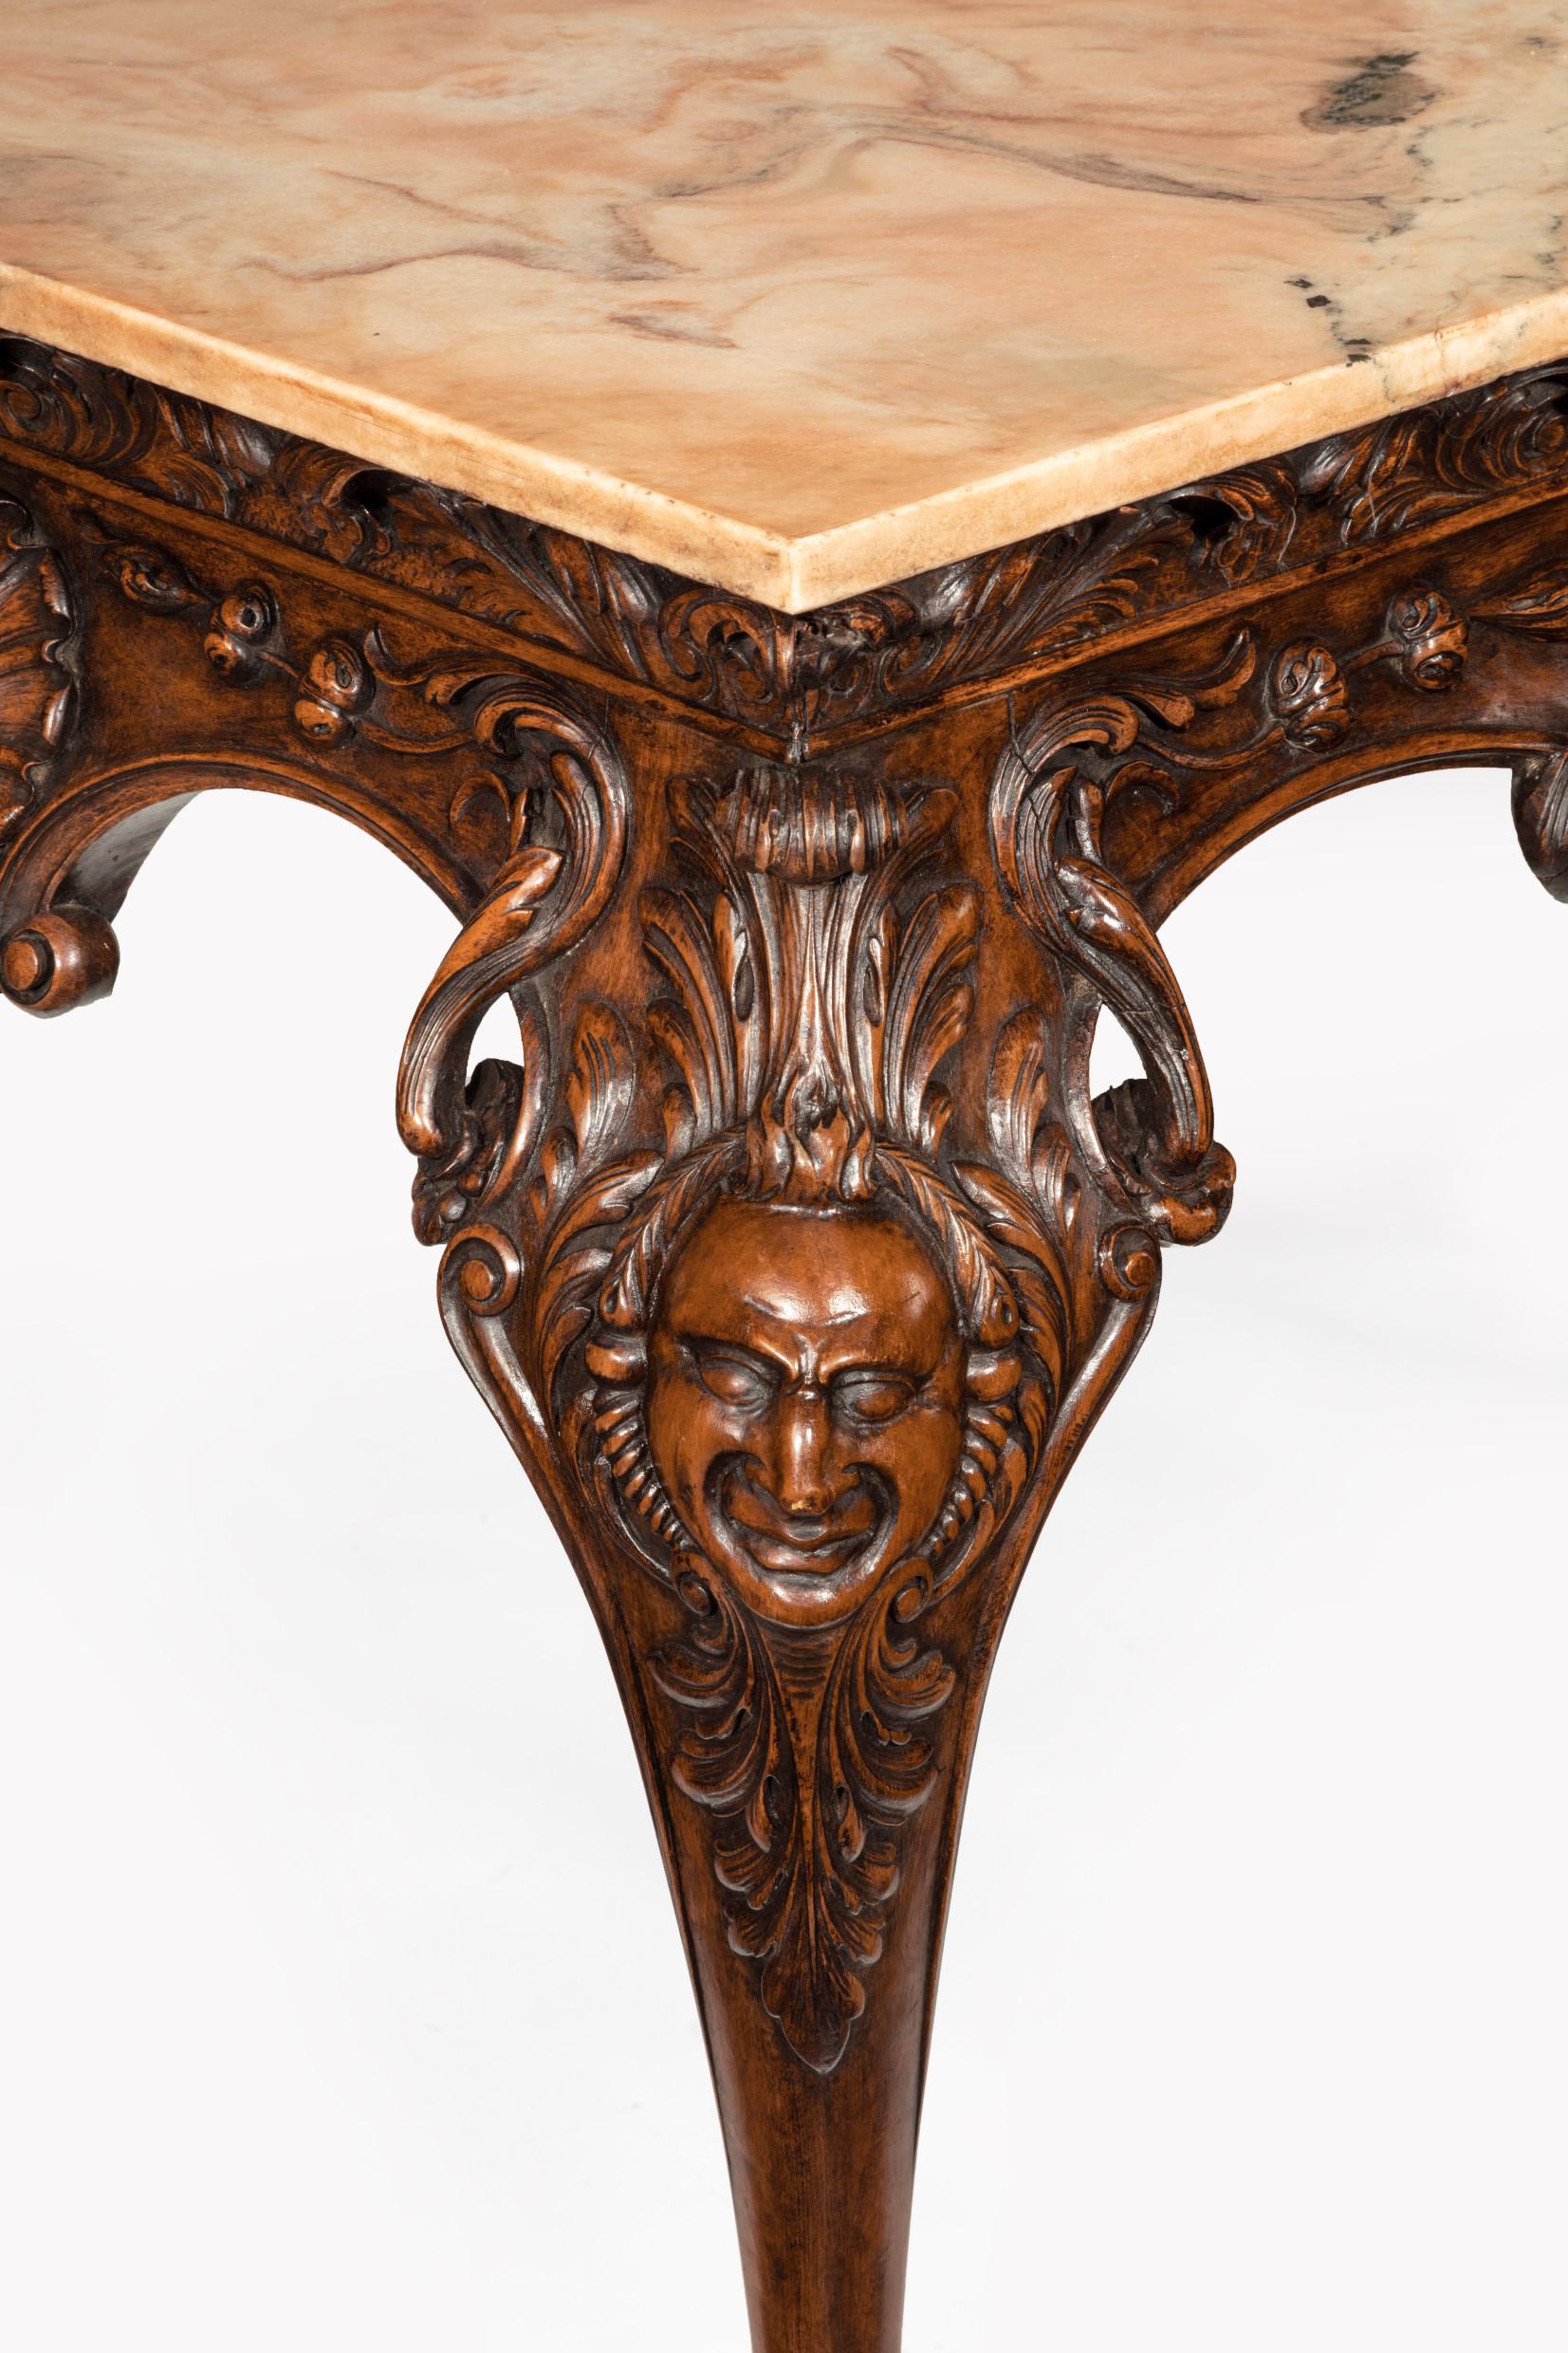 Rococo Revival Gillows 19th Century Walnut Carved Centre Console Table with Marble Top